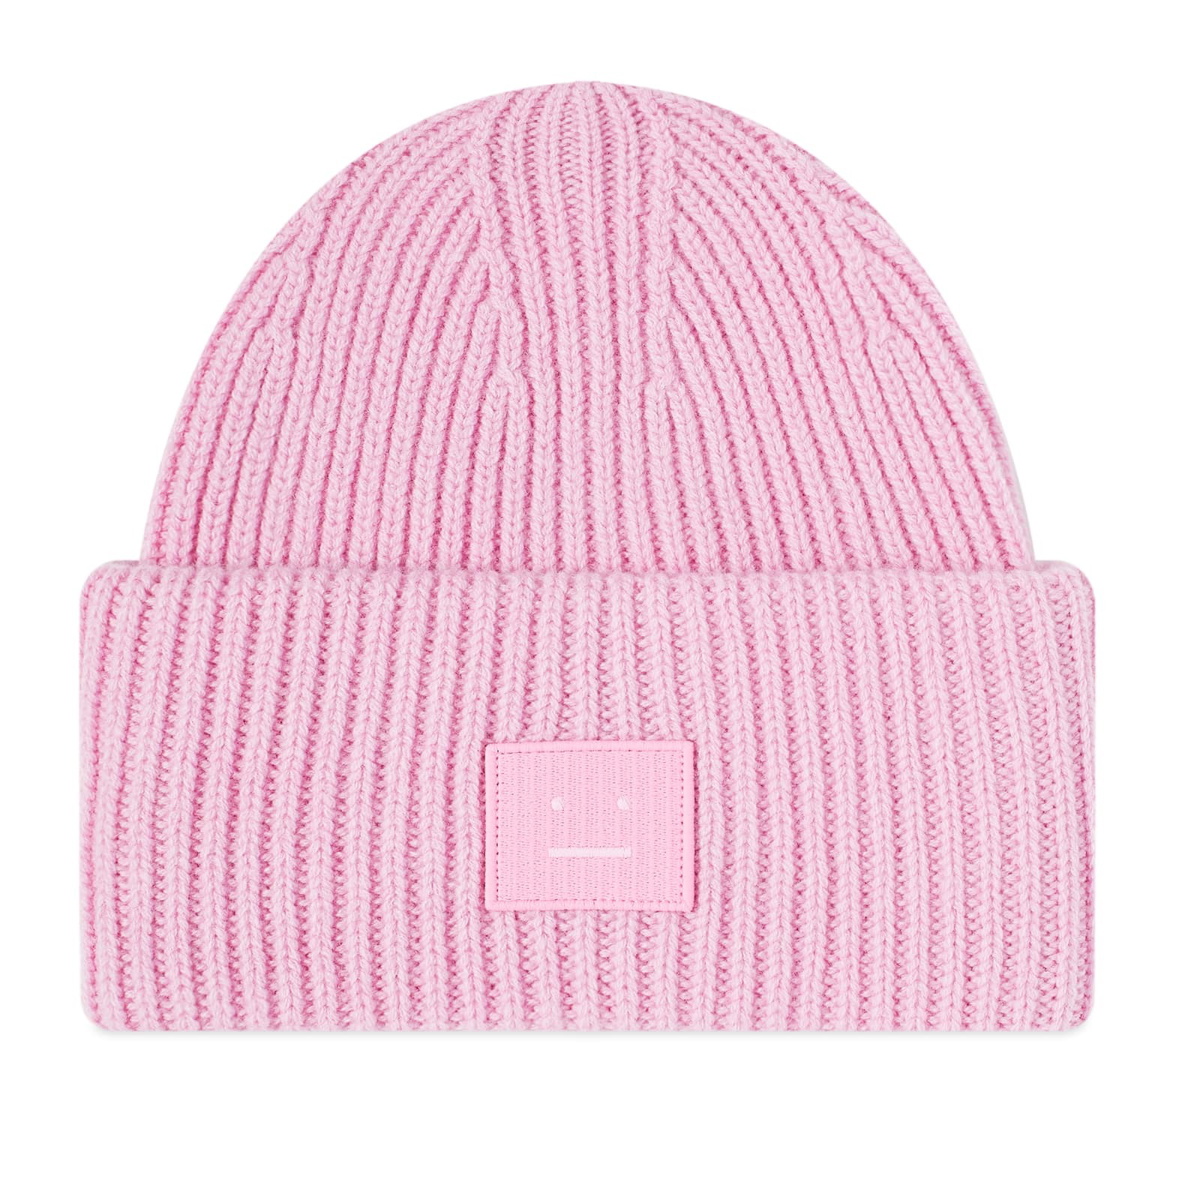 Acne Studios Pansy N Face Beanie in Bubble Pink Acne Studios